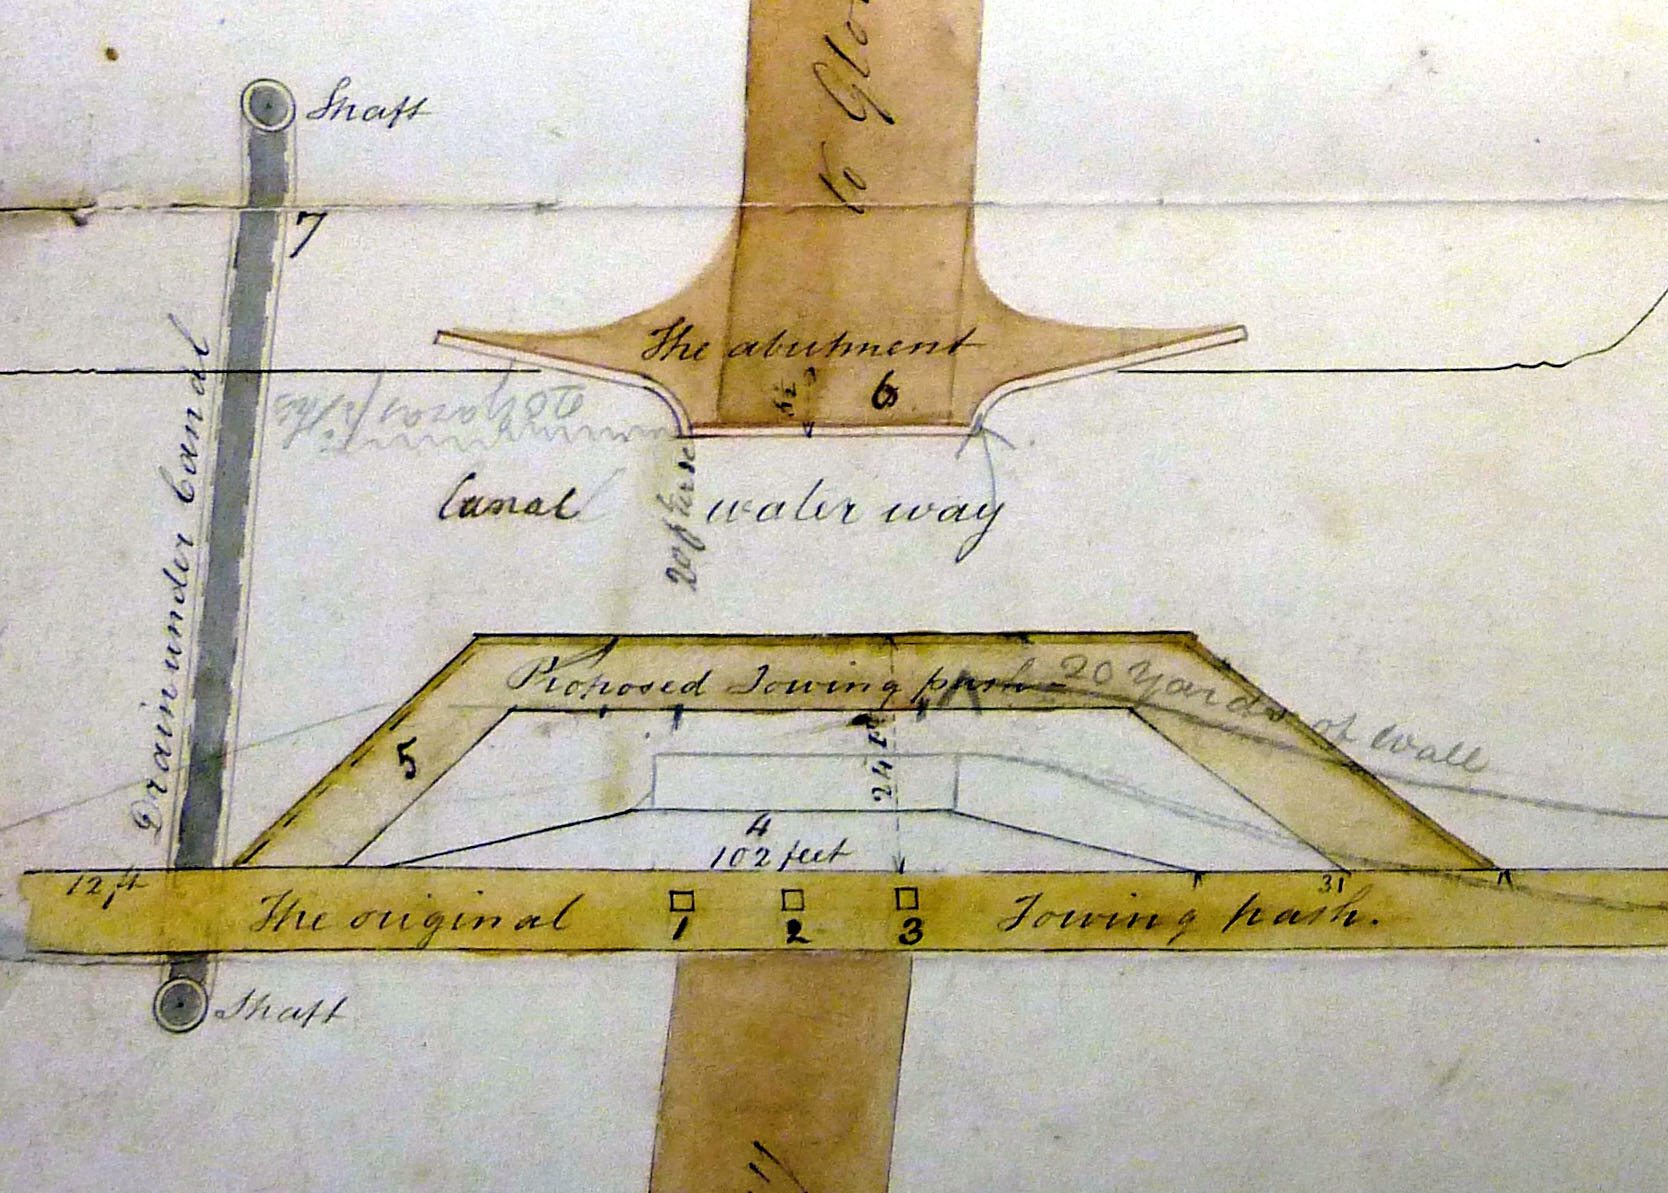 Plan of the proposed alteration to the towpath, also showing the drain, 1842. (GA D1180/10/44)